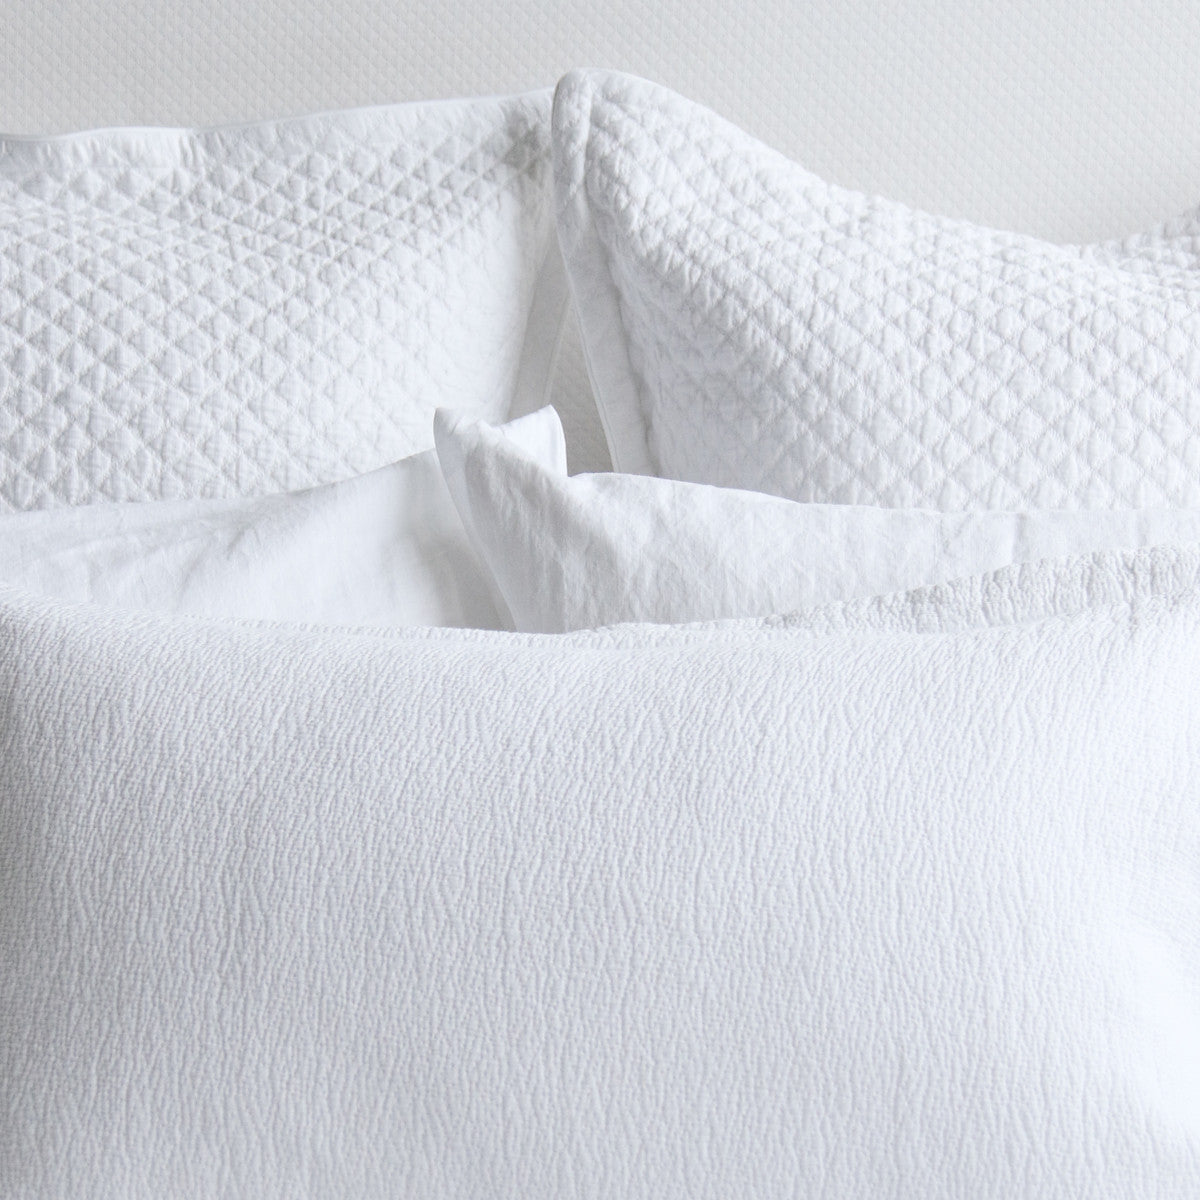 Q&A: Why do some cotton sheets pill?